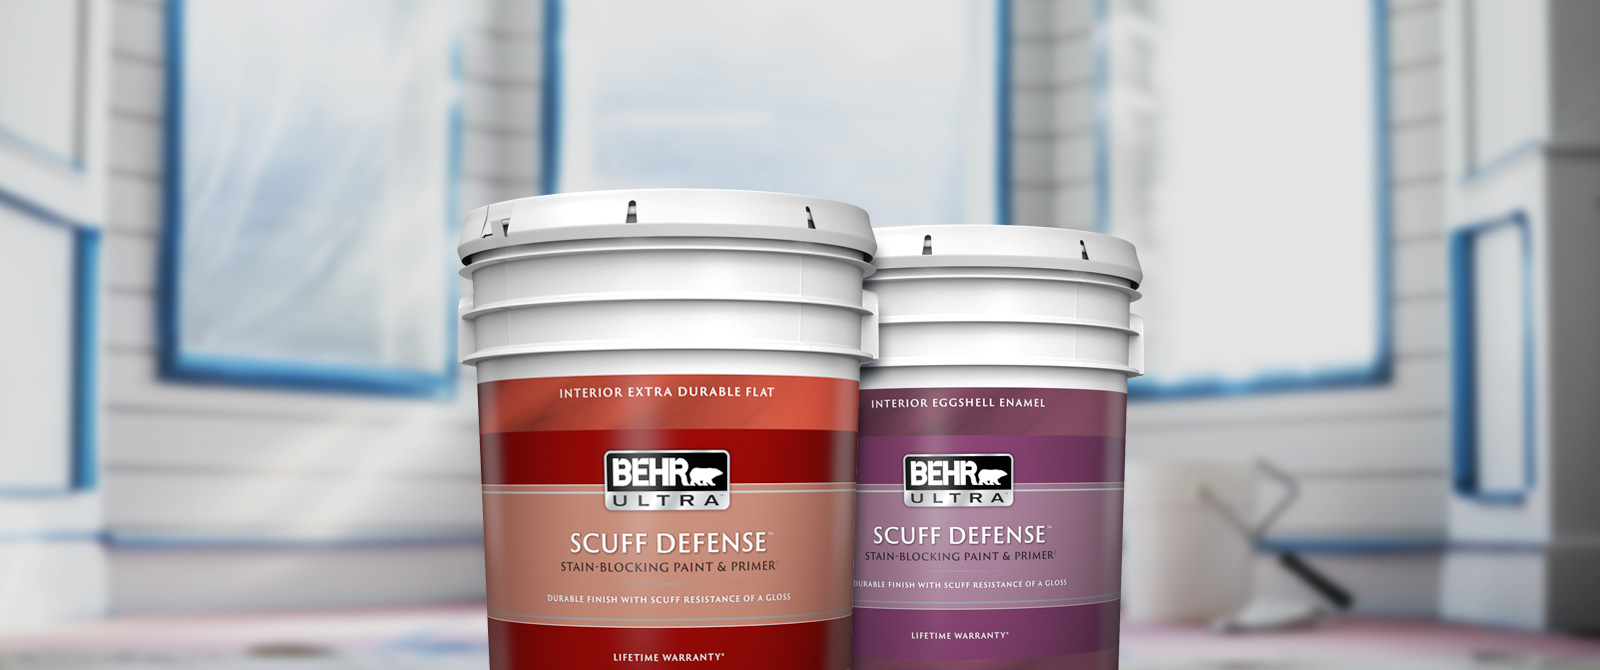 Two 5 gallon cans of BEHR ULTRA® SCUFF DEFENSE™ Interior Paint.